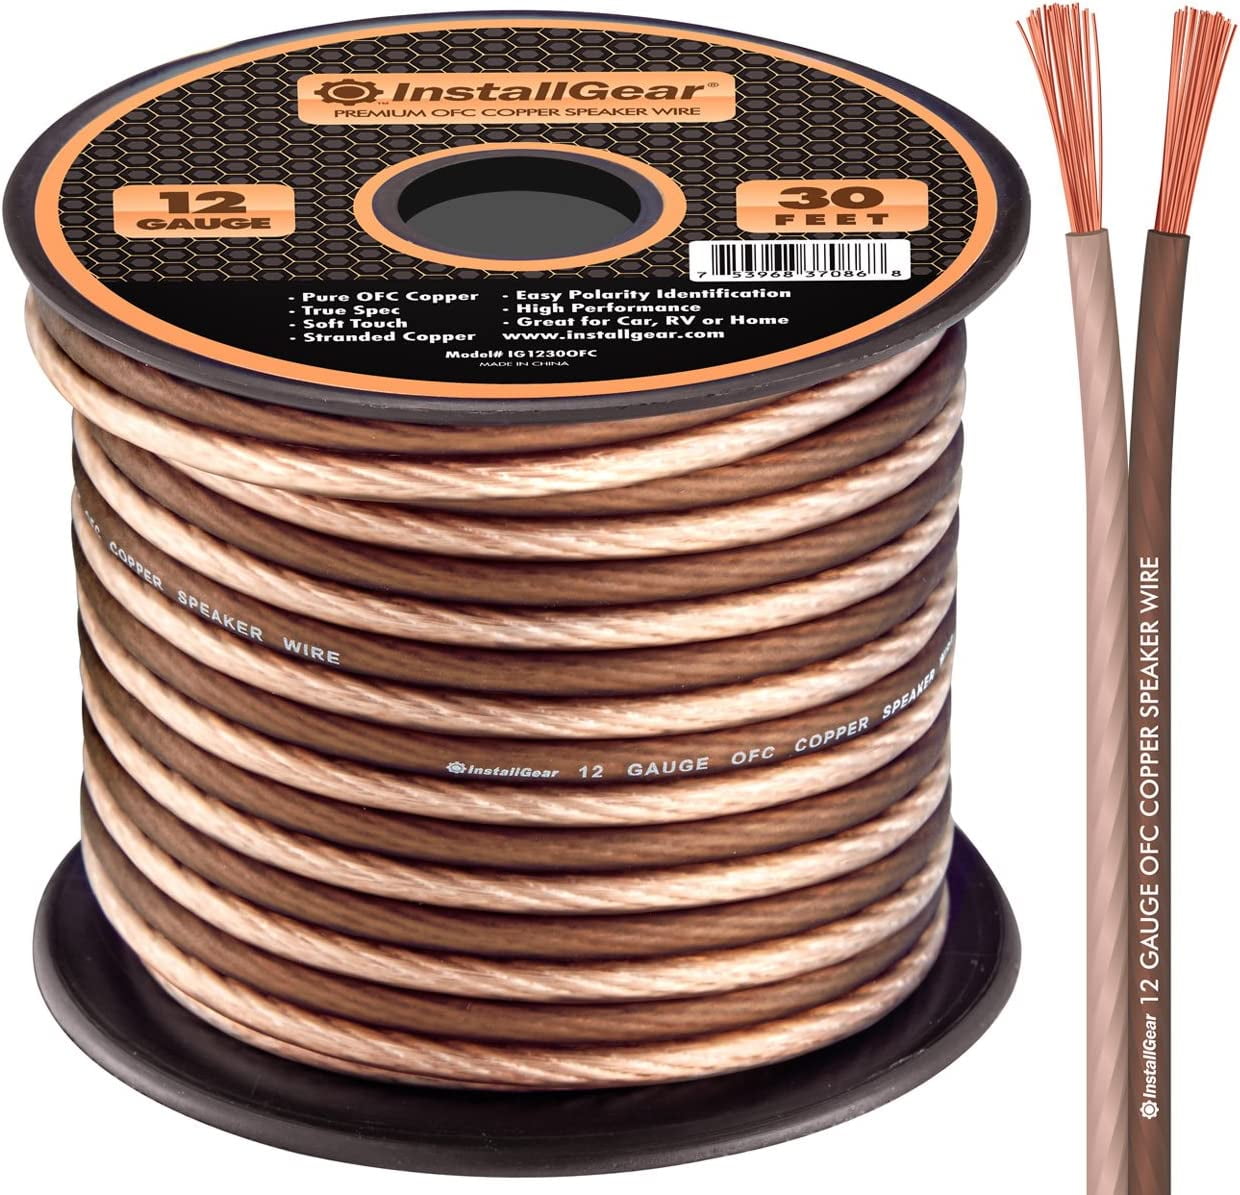 InstallGear Brown 12 AWG Gauge Speaker Wire - 99.9% Oxygen-Free Copper -  True Spec and Soft Touch Cable (30-feet) 